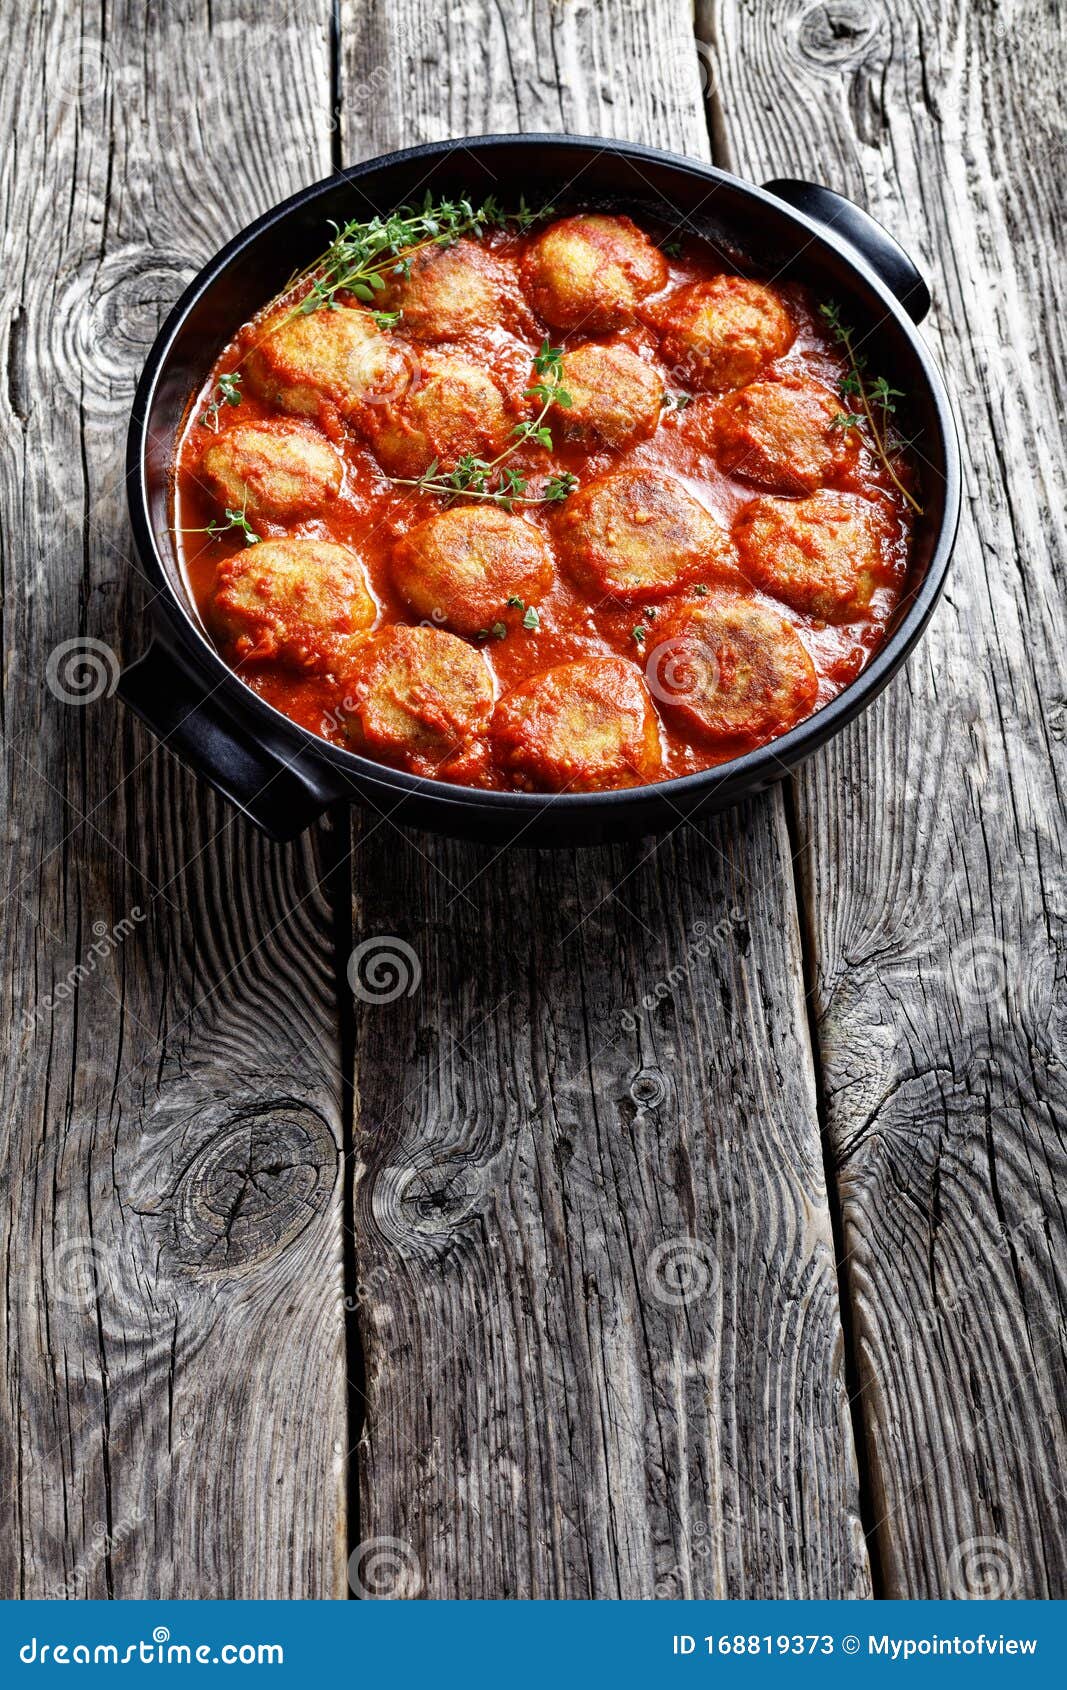 Fried Fish Balls In Spicy Tomato Sauce Stock Image Image